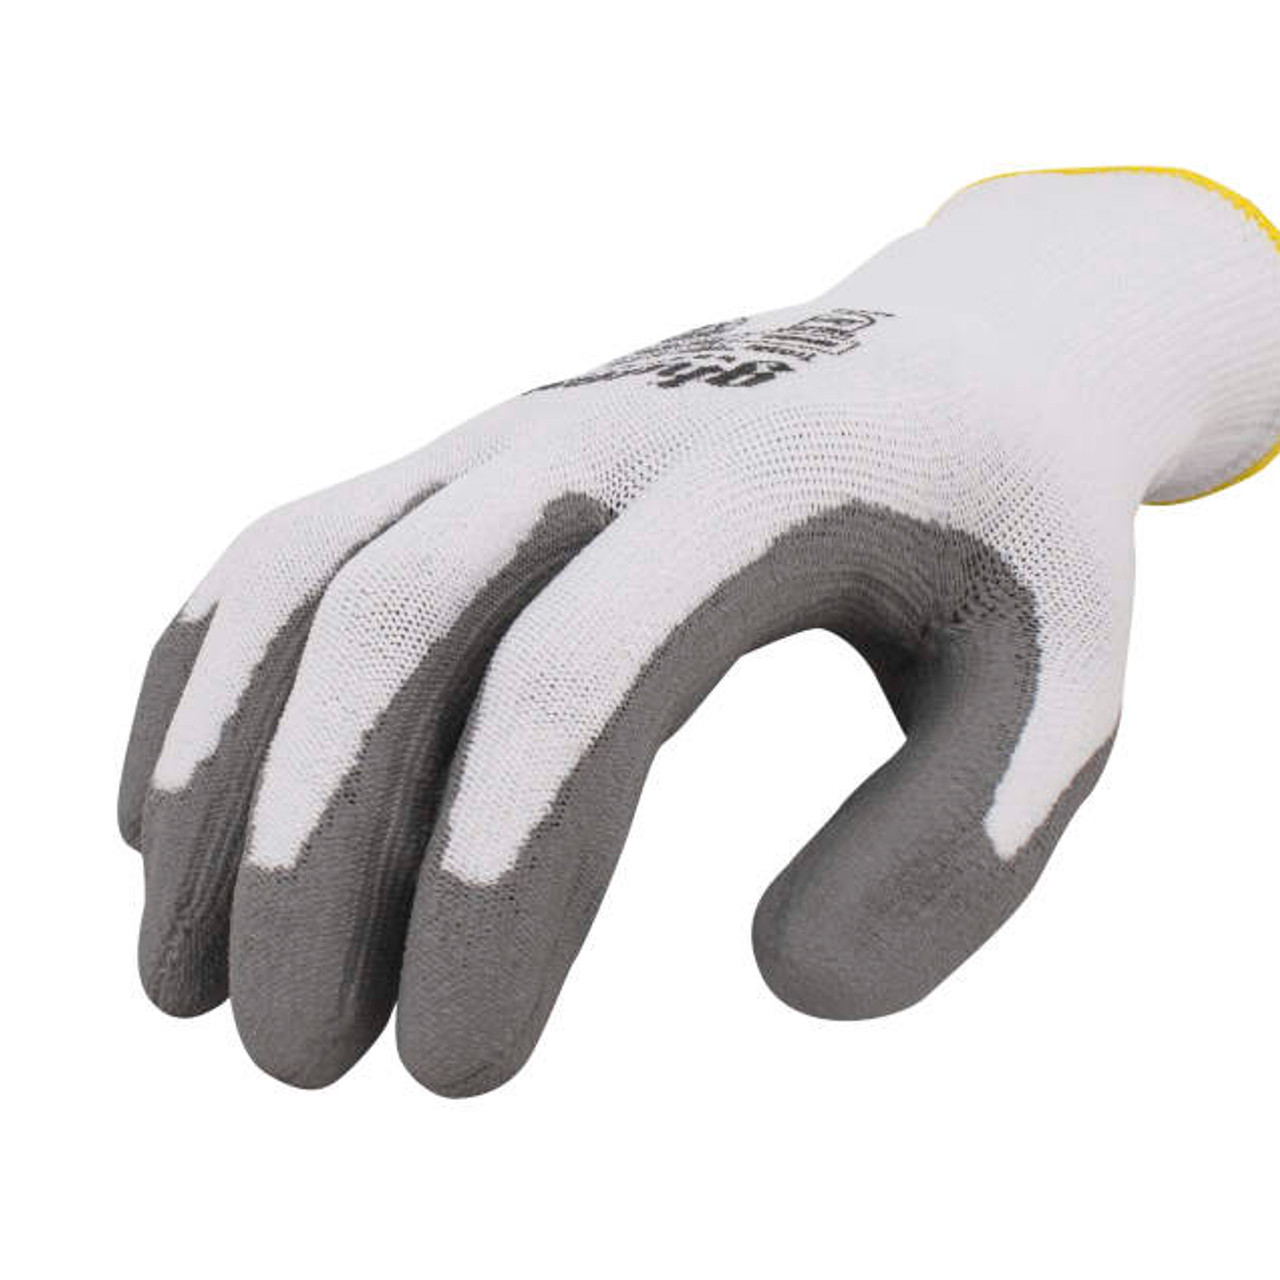 Radians RWG532 Touchscreen Cut Protection Level A2 Work Glove